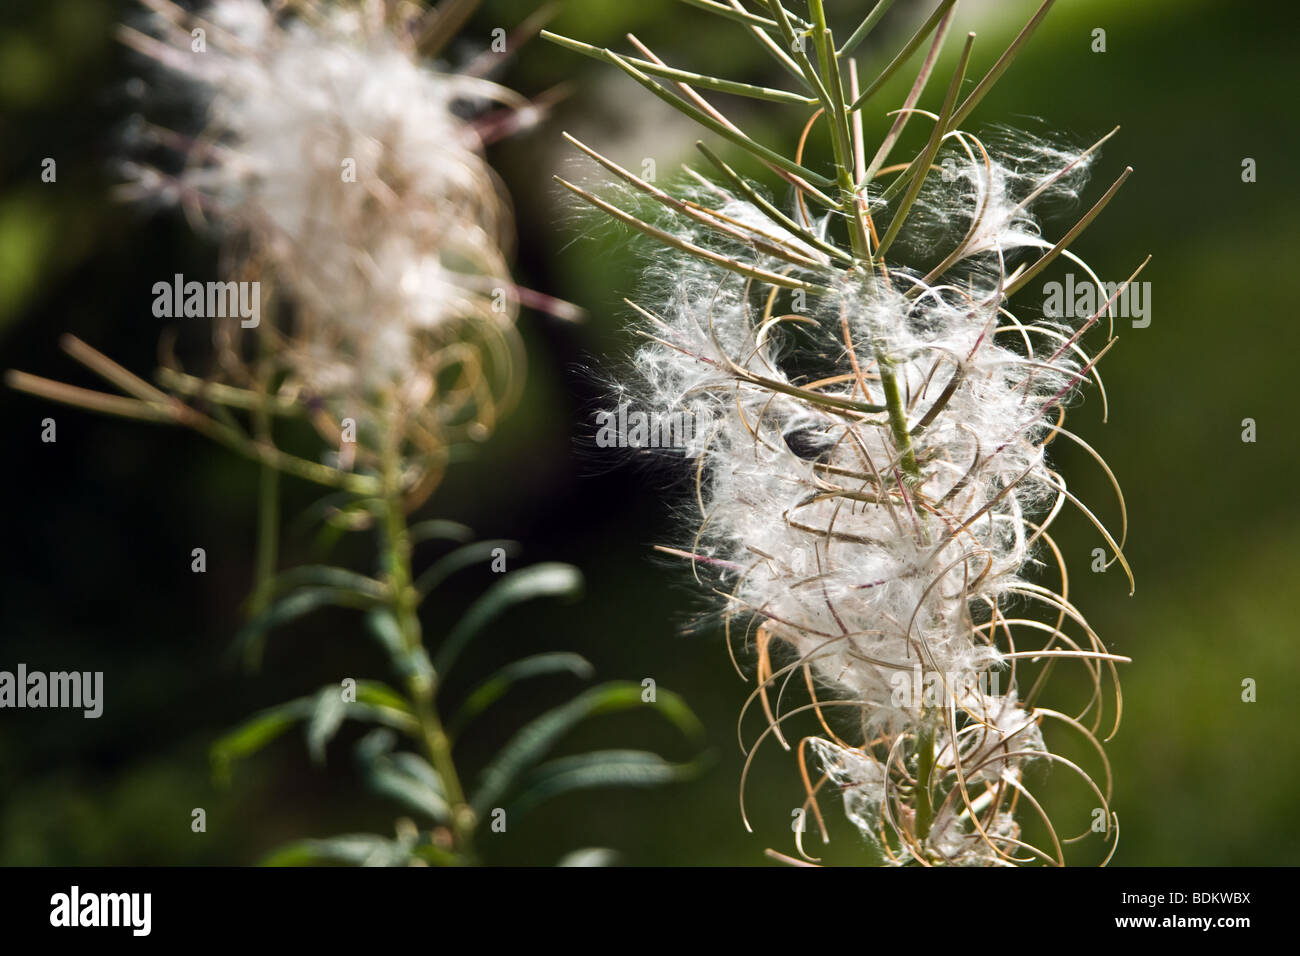 Canada thistle close-up Foto Stock